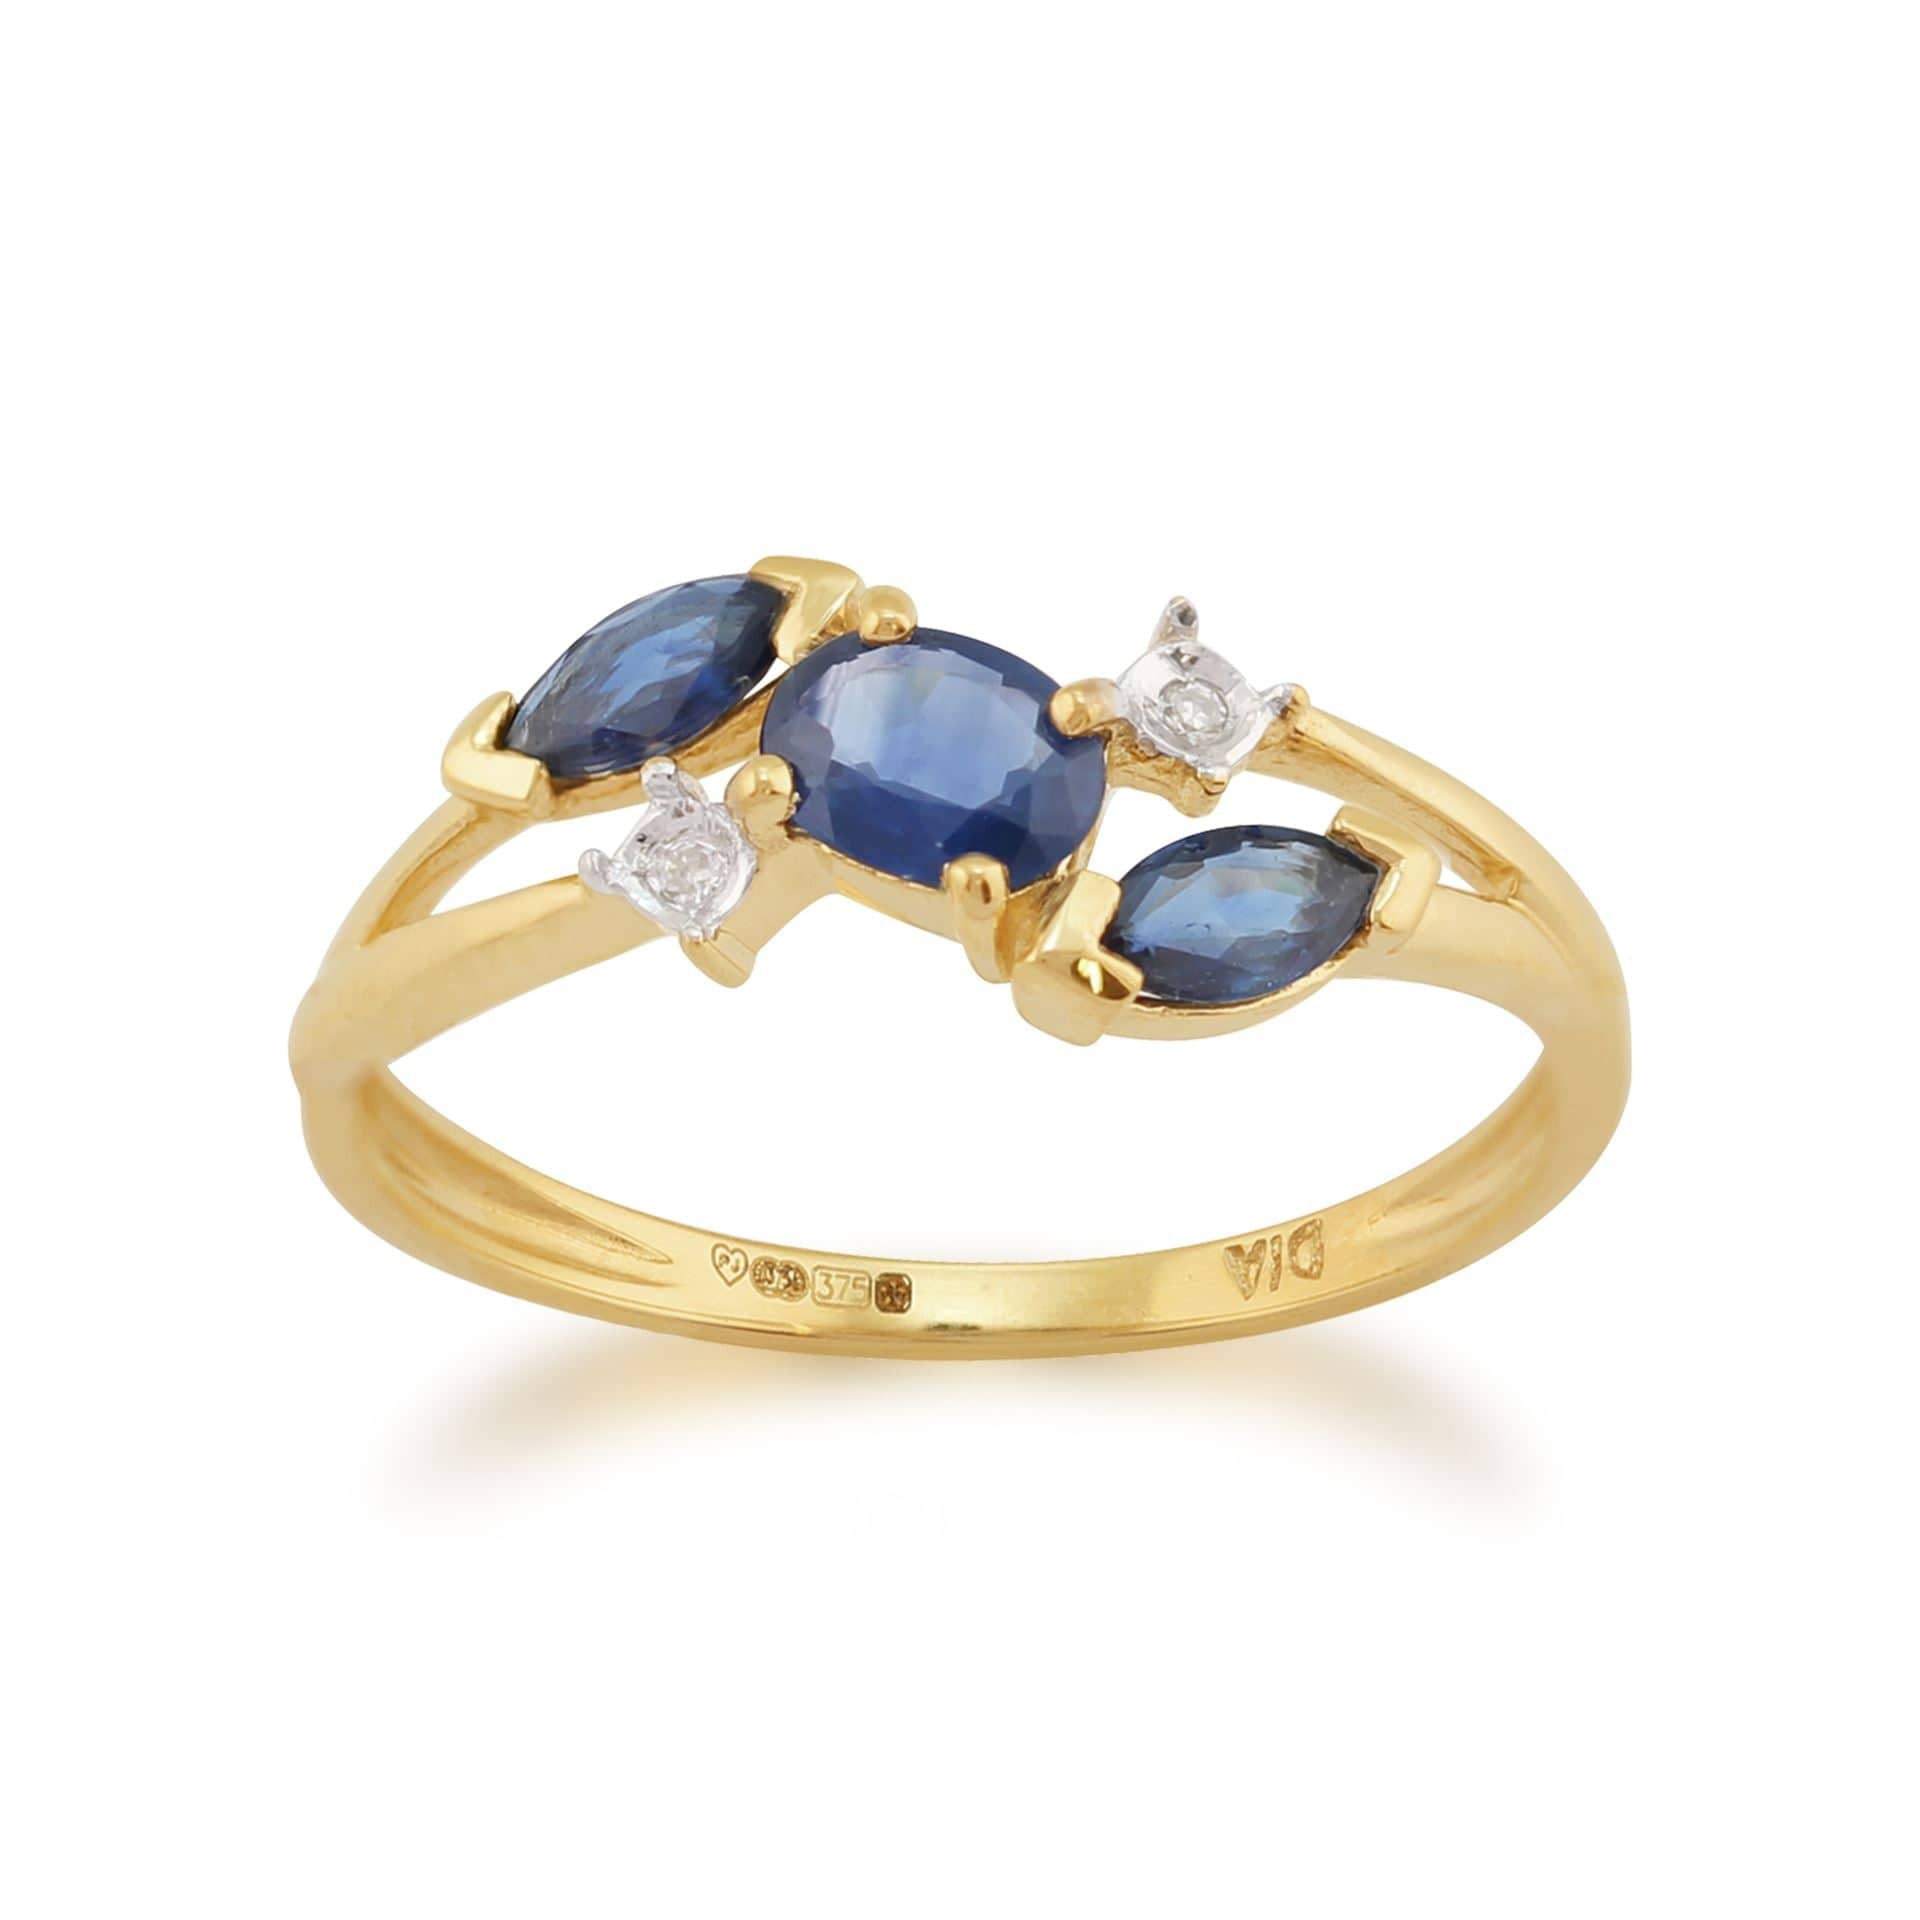 25343 Contemporary Marquise Light Blue Sapphire & Diamond Three Stone Ring in 9ct Yellow Gold 1